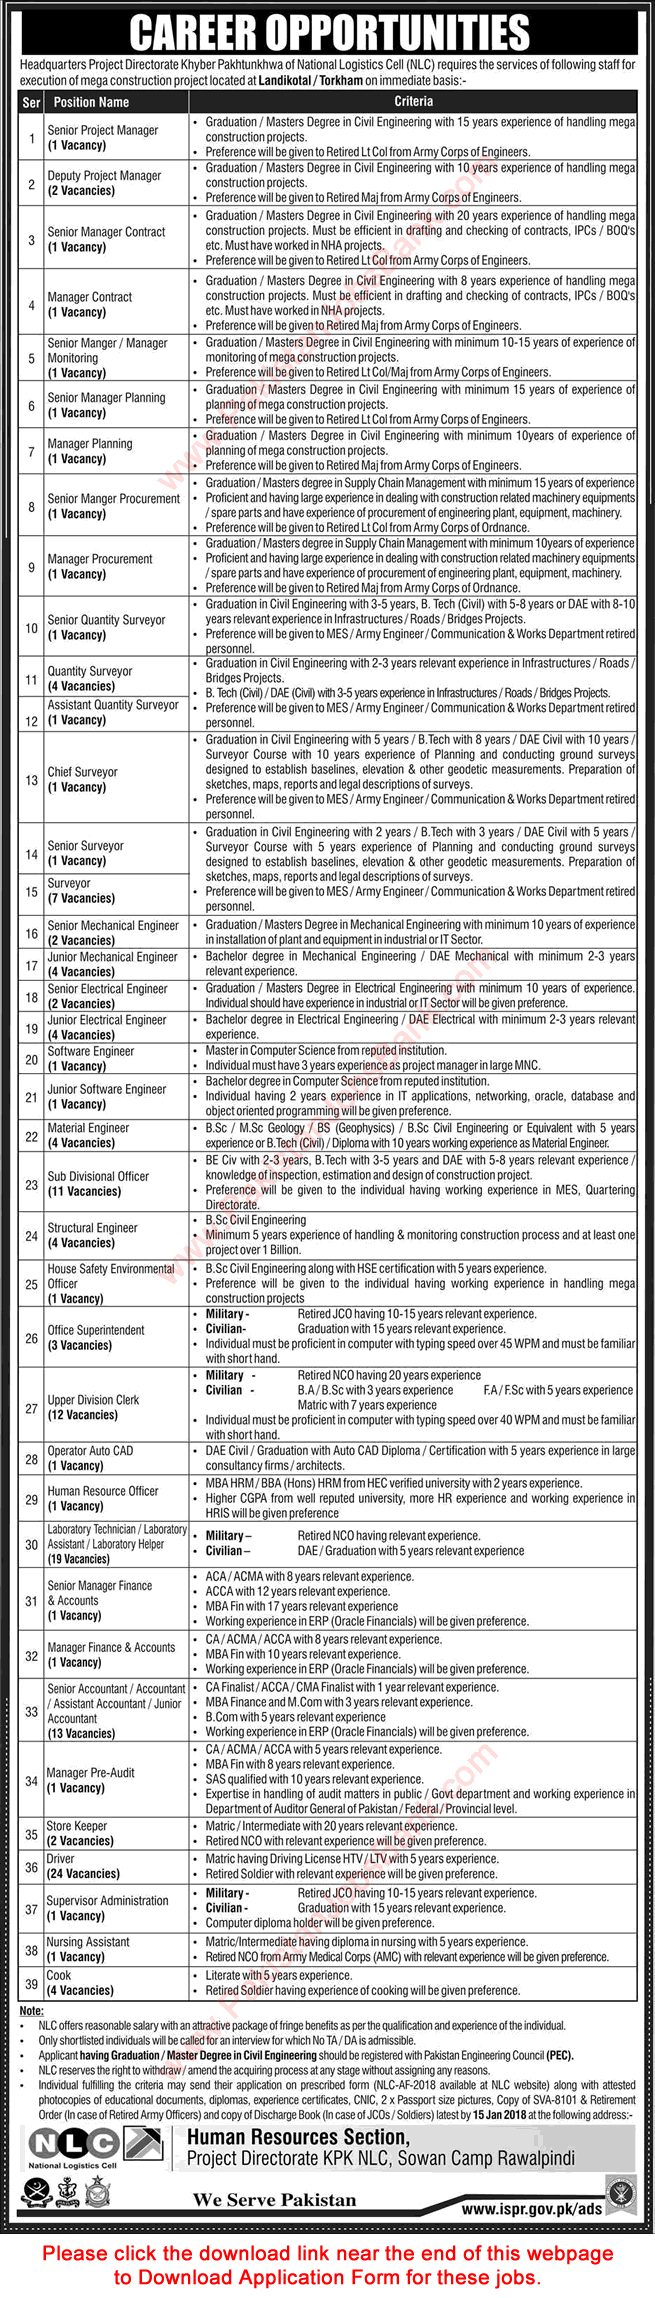 NLC Jobs December 2017 / 2018 Application Form Lab Technicians, SDO, Accountants & Others Latest